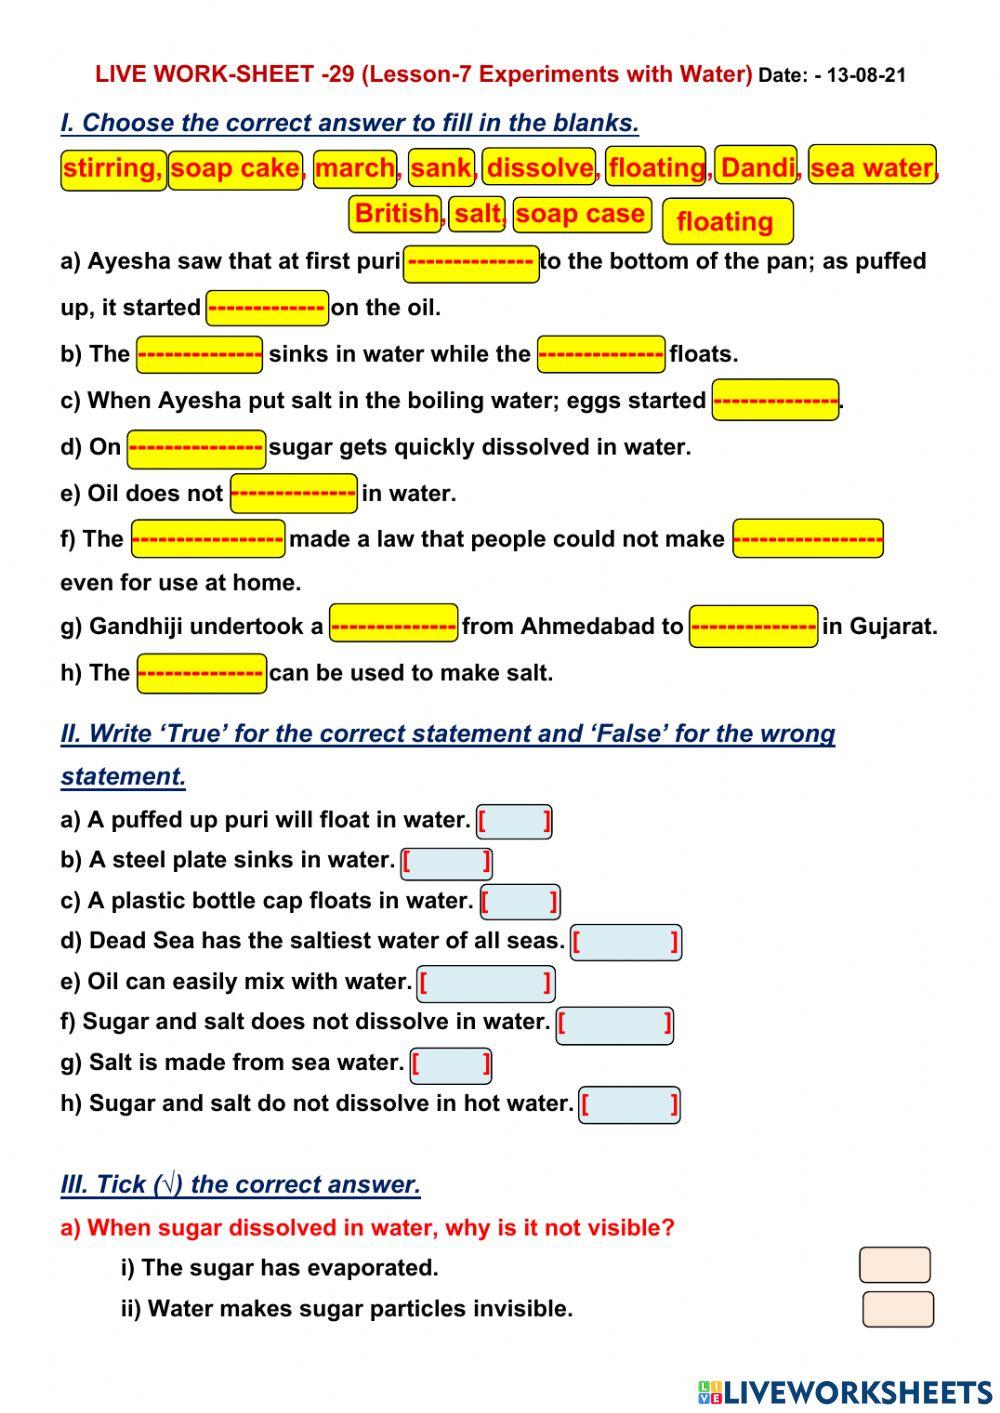 Worksheet No- 29 Experiments with water